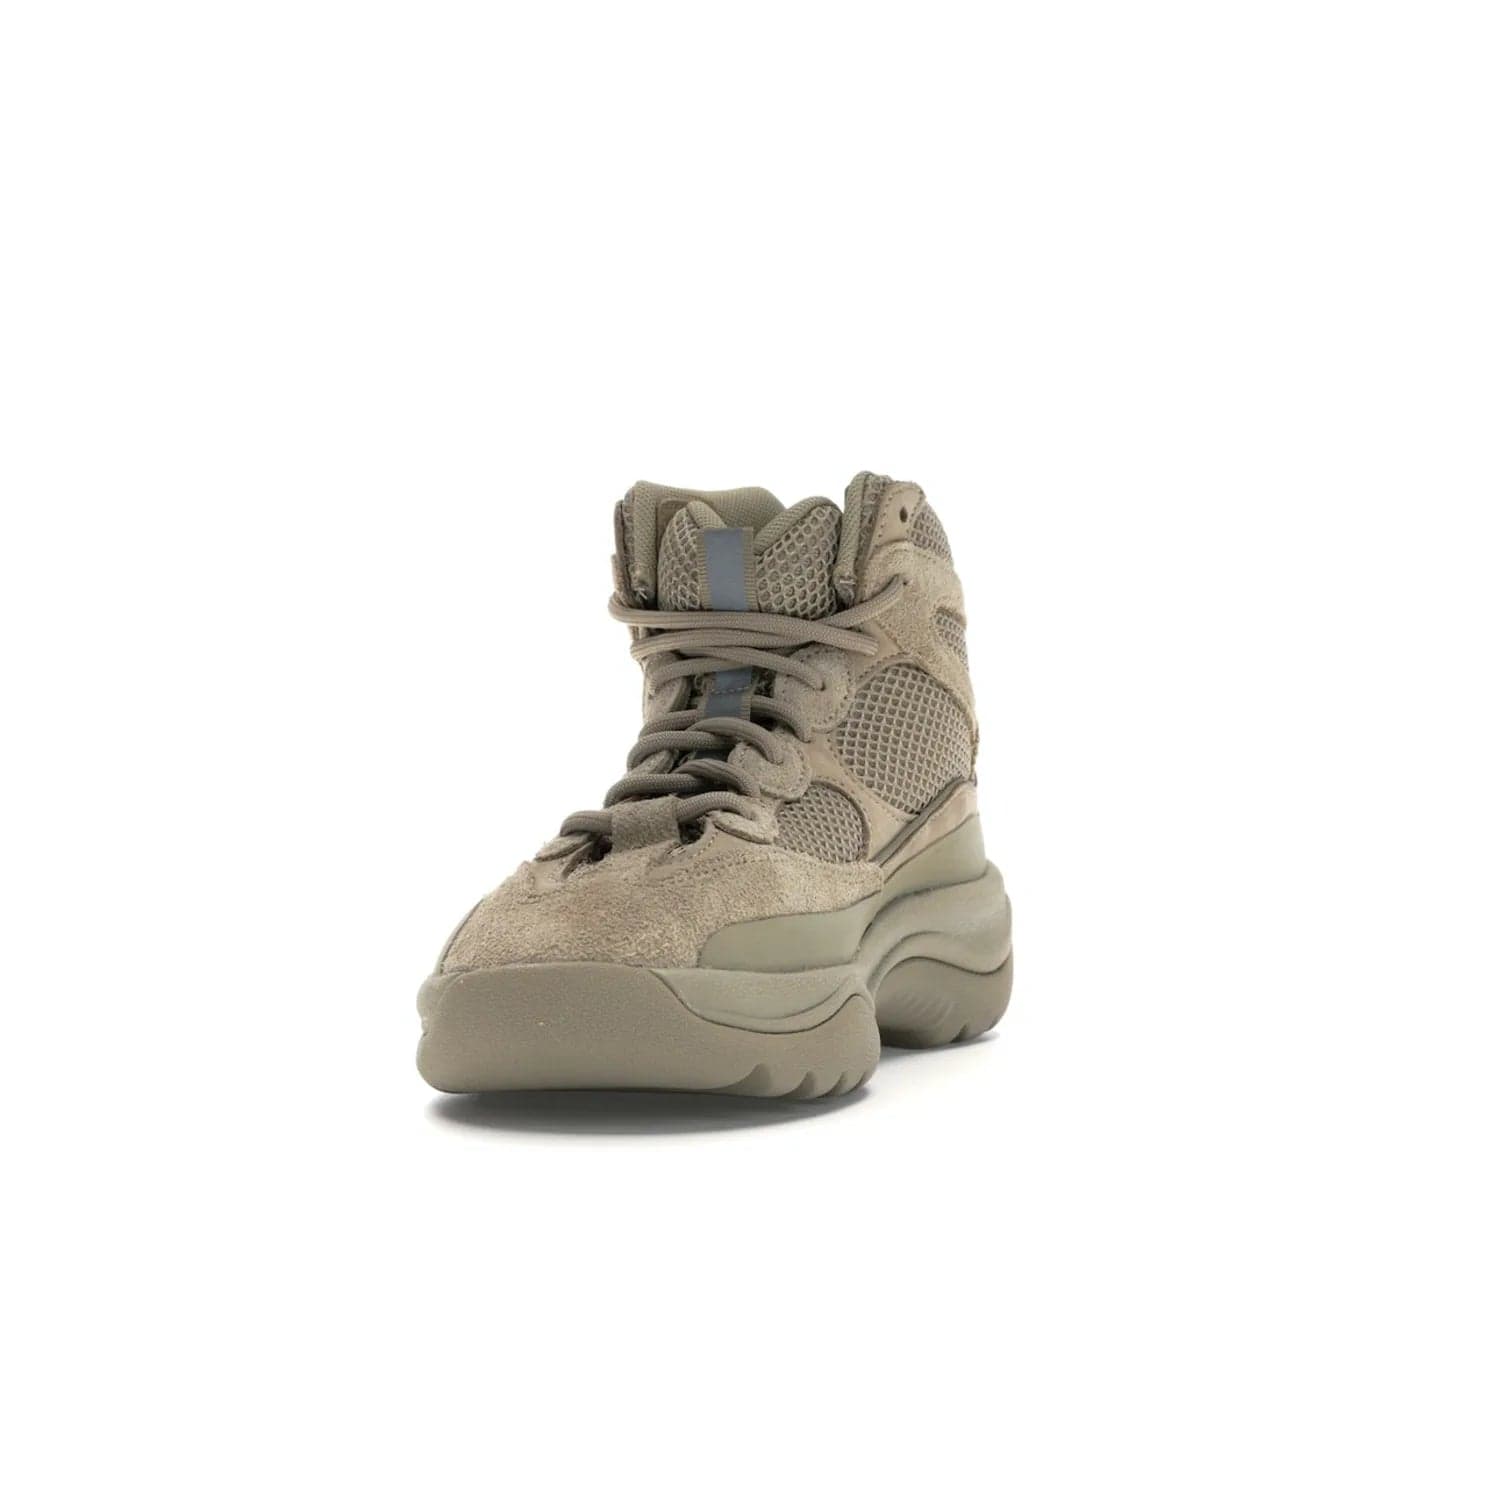 adidas Yeezy Desert Boot Rock - Image 12 - Only at www.BallersClubKickz.com - #
This season, make a fashion statement with the adidas Yeezy Desert Boot Rock. Nubuck and suede upper offers tonal style while the grooved sole provides traction and stability. Get yours in April 2019.